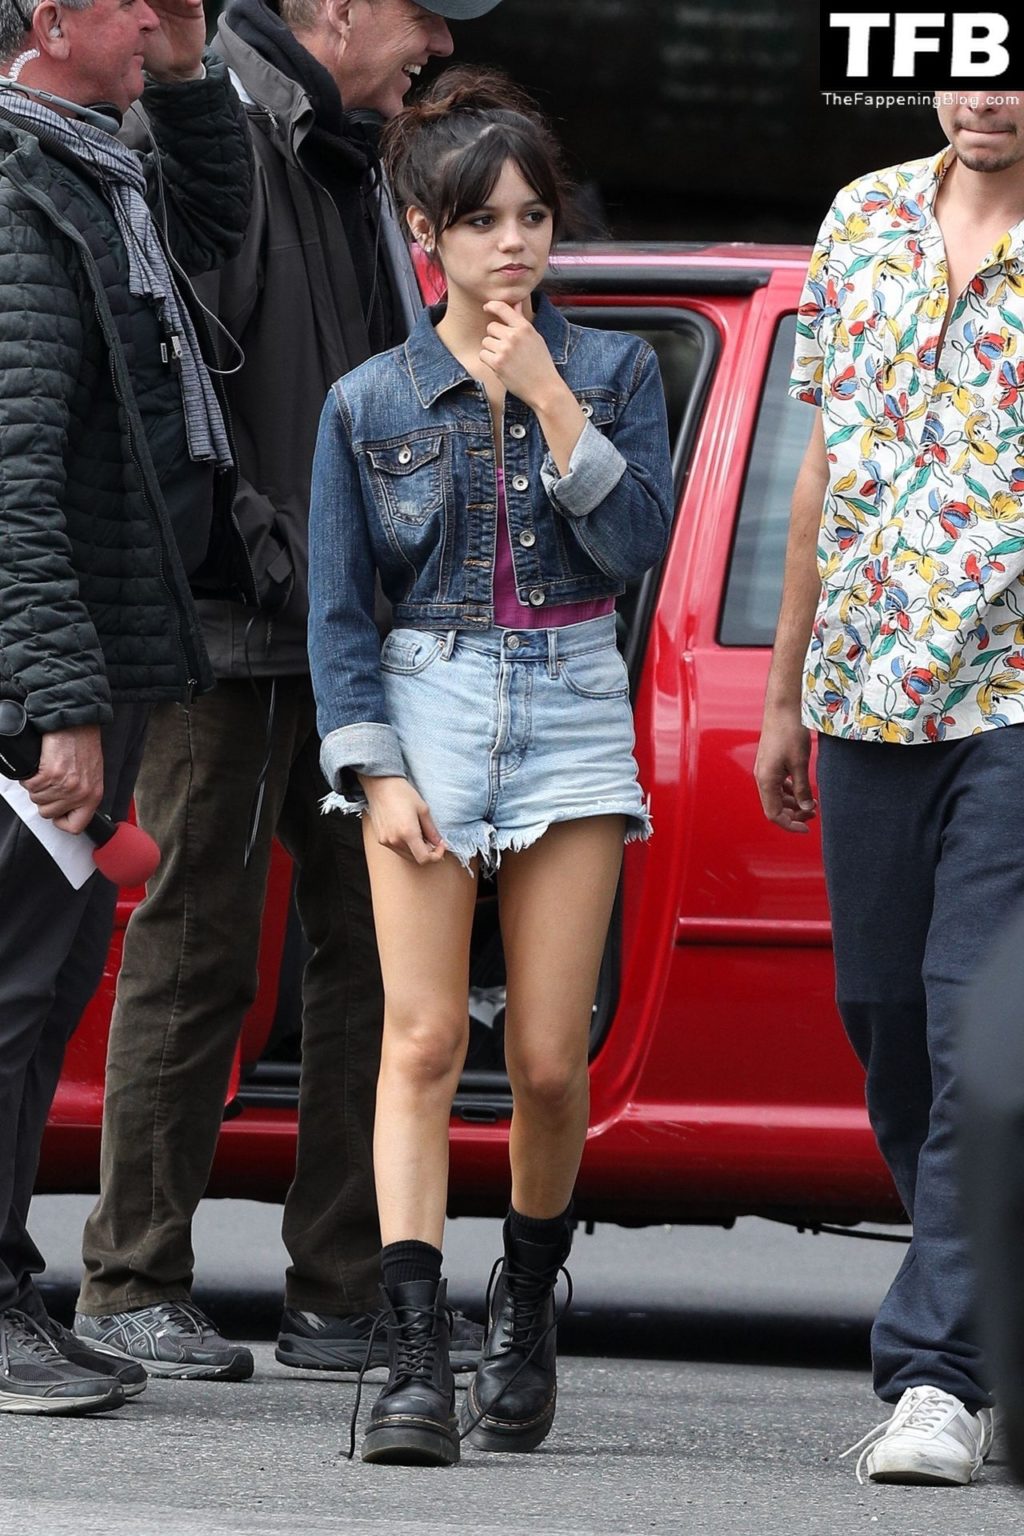 Jenna Ortega Sexy The Fappening Blog 3 1024x1536 - Leggy Jenna Ortega is Spotted in Short Shorts on the Set of “Finest Kind” (24 Photos)